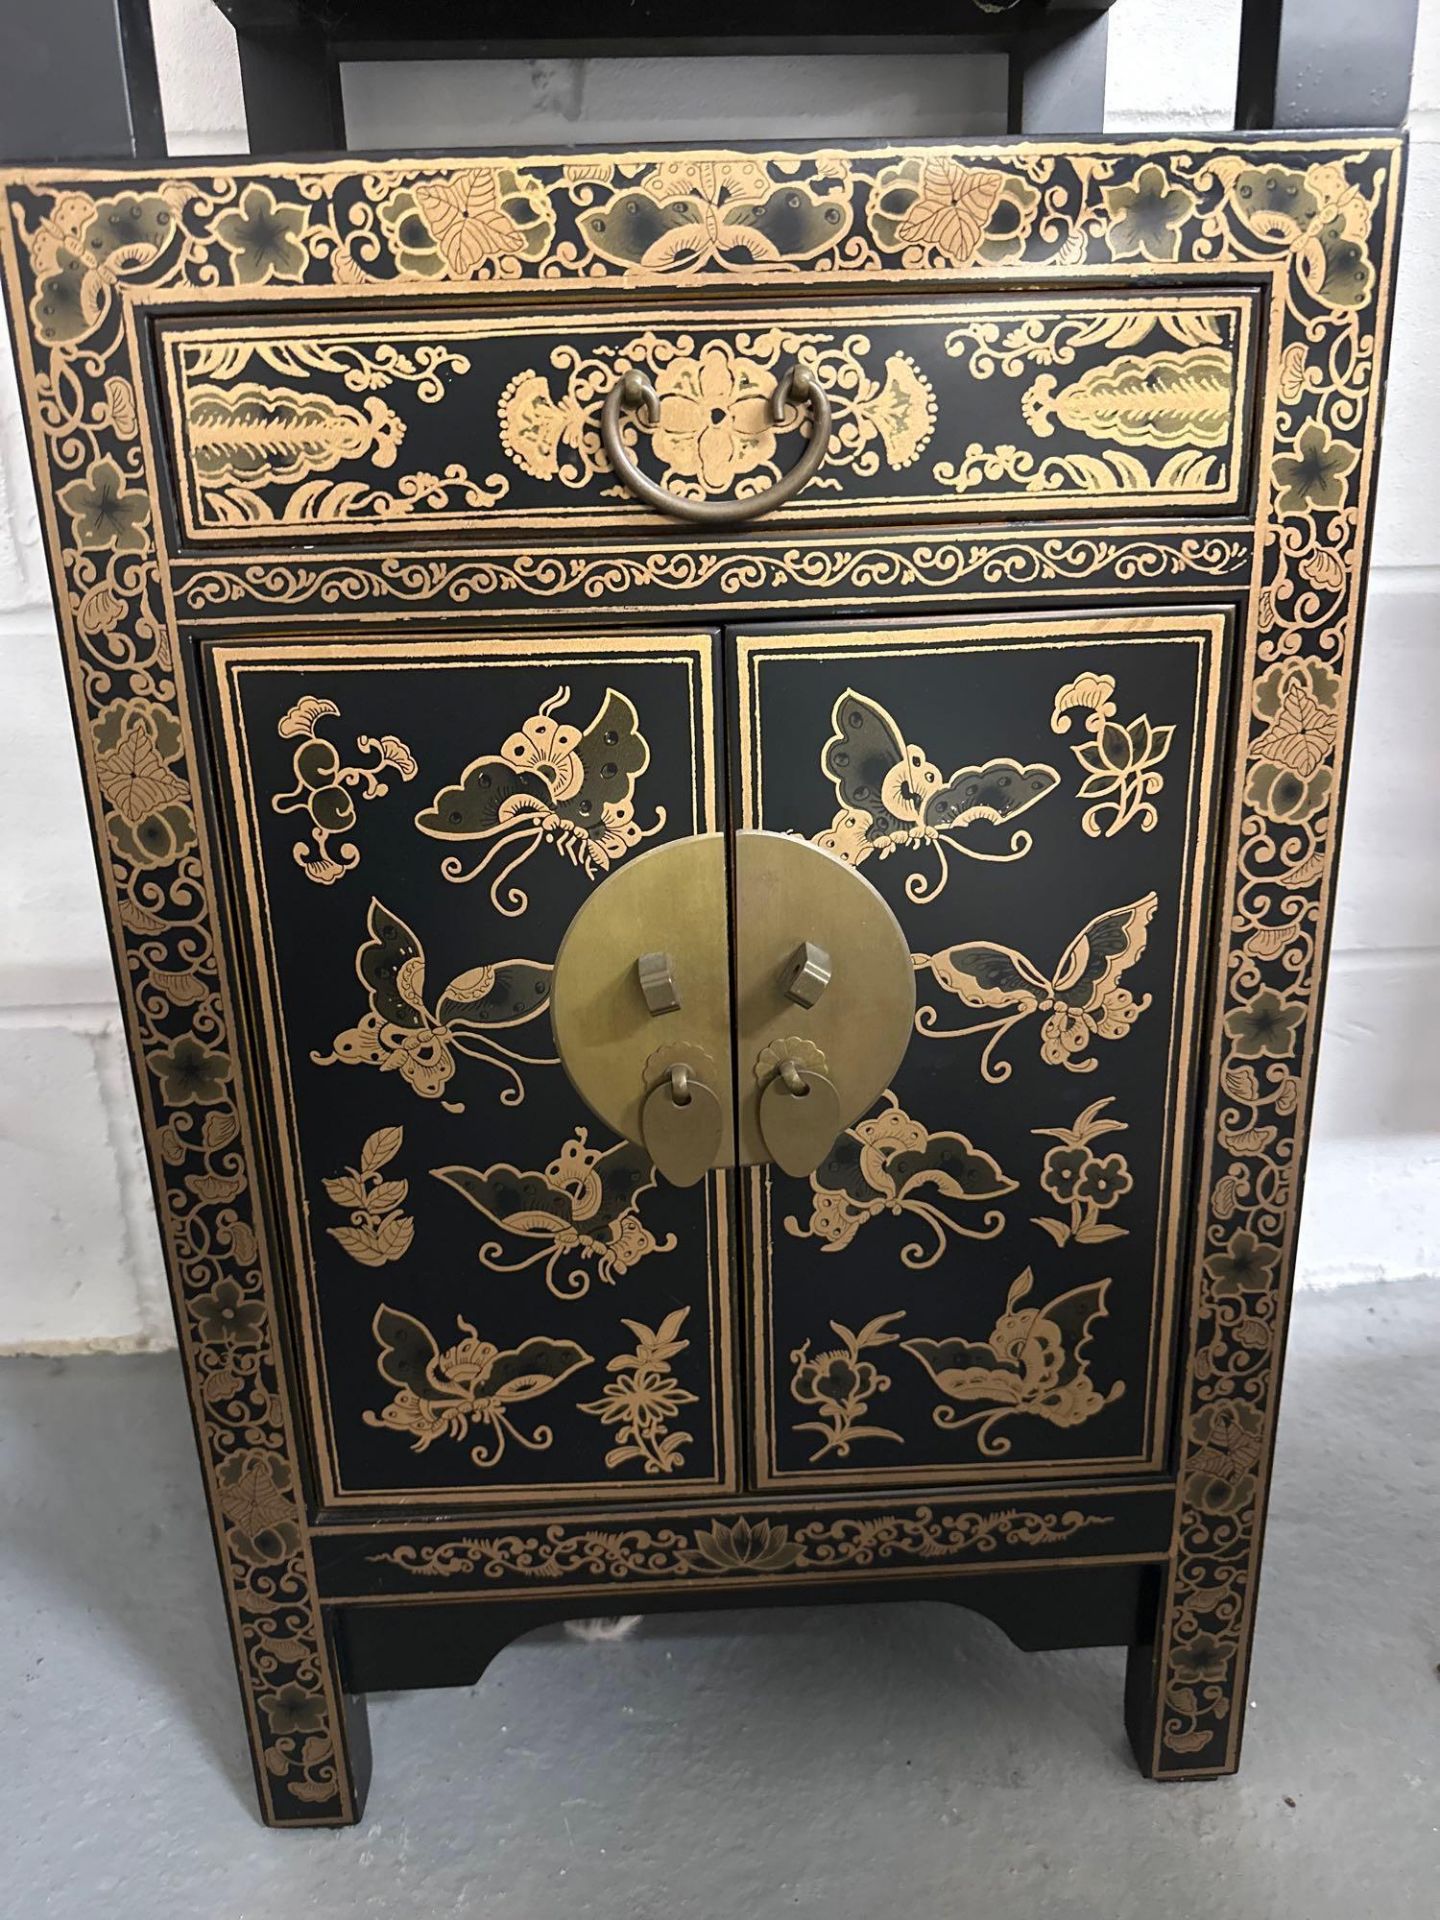 Chinese Lacquered Side Cabinet The cabinet has figurative panels on the front in lacquered gold - Image 2 of 4